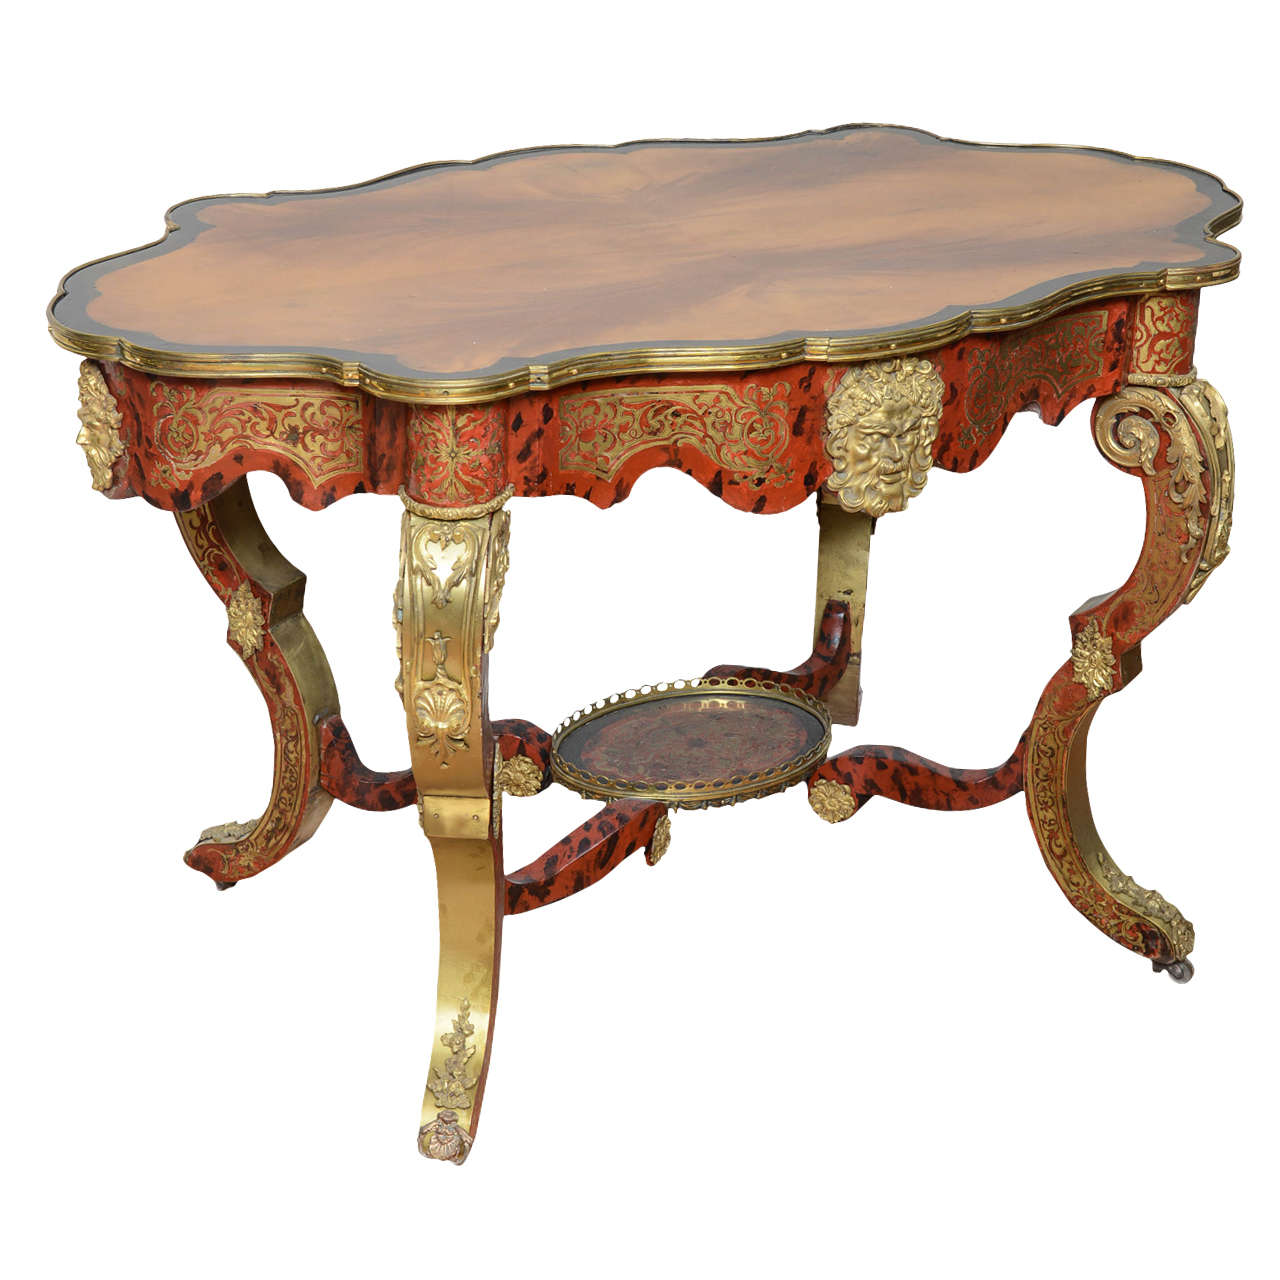 Rare 18th Century French Boulle Table